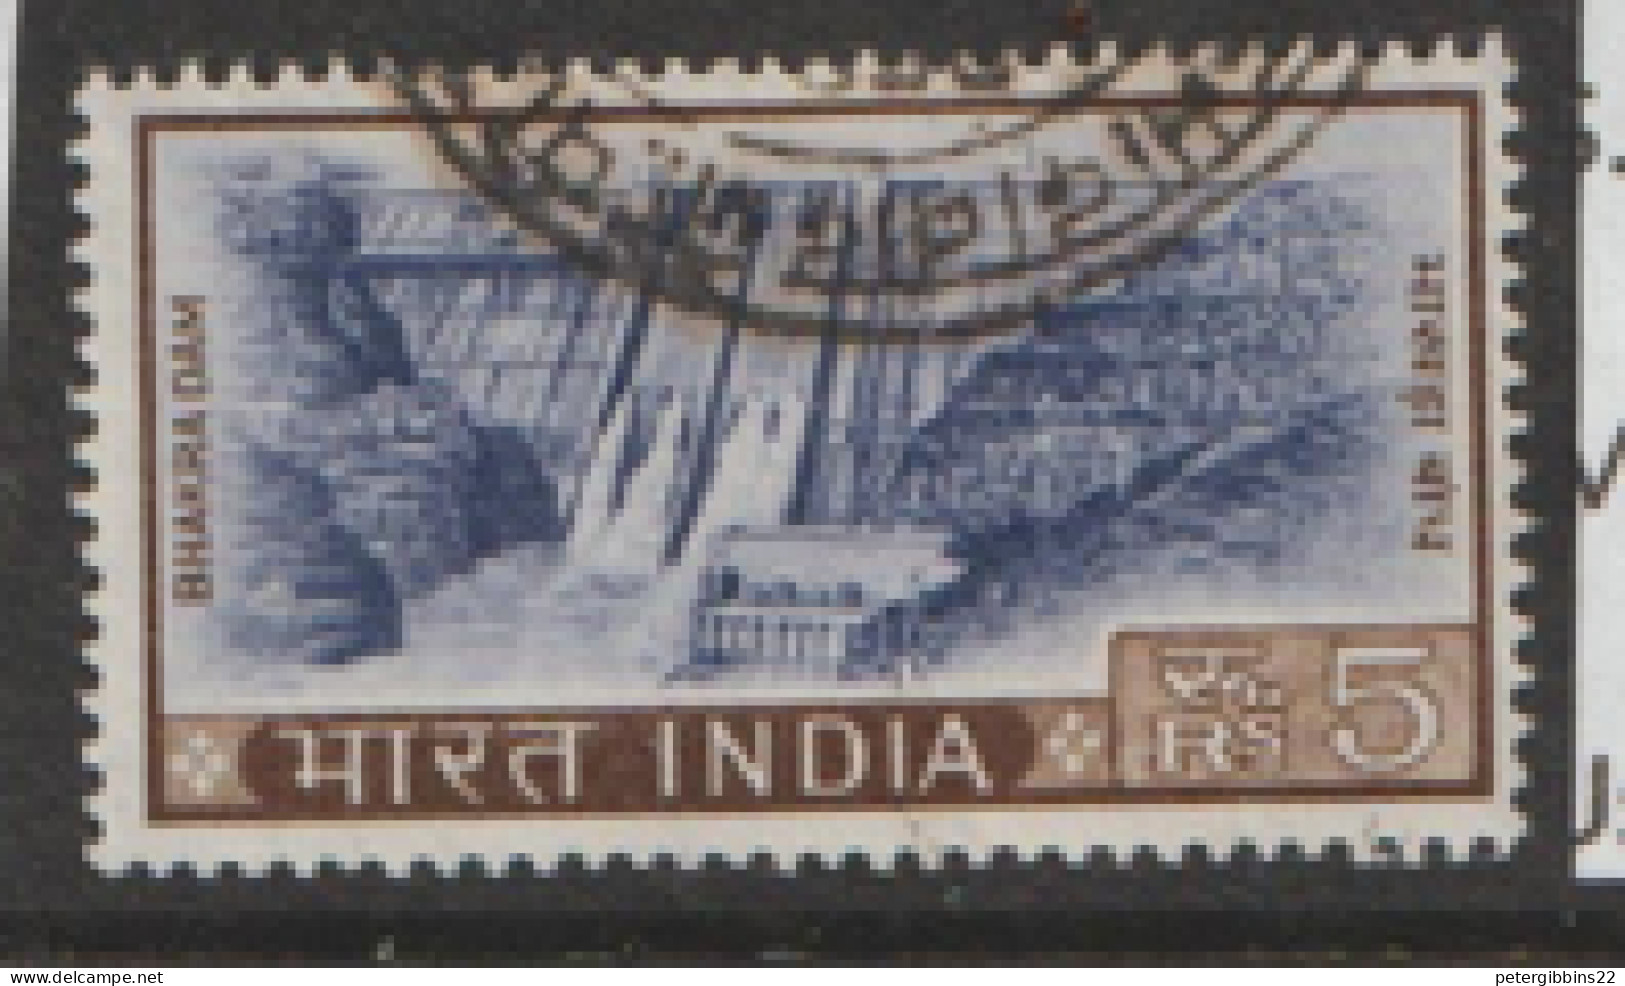 India  1965   SG  519   5Rs       Fine Used - Used Stamps